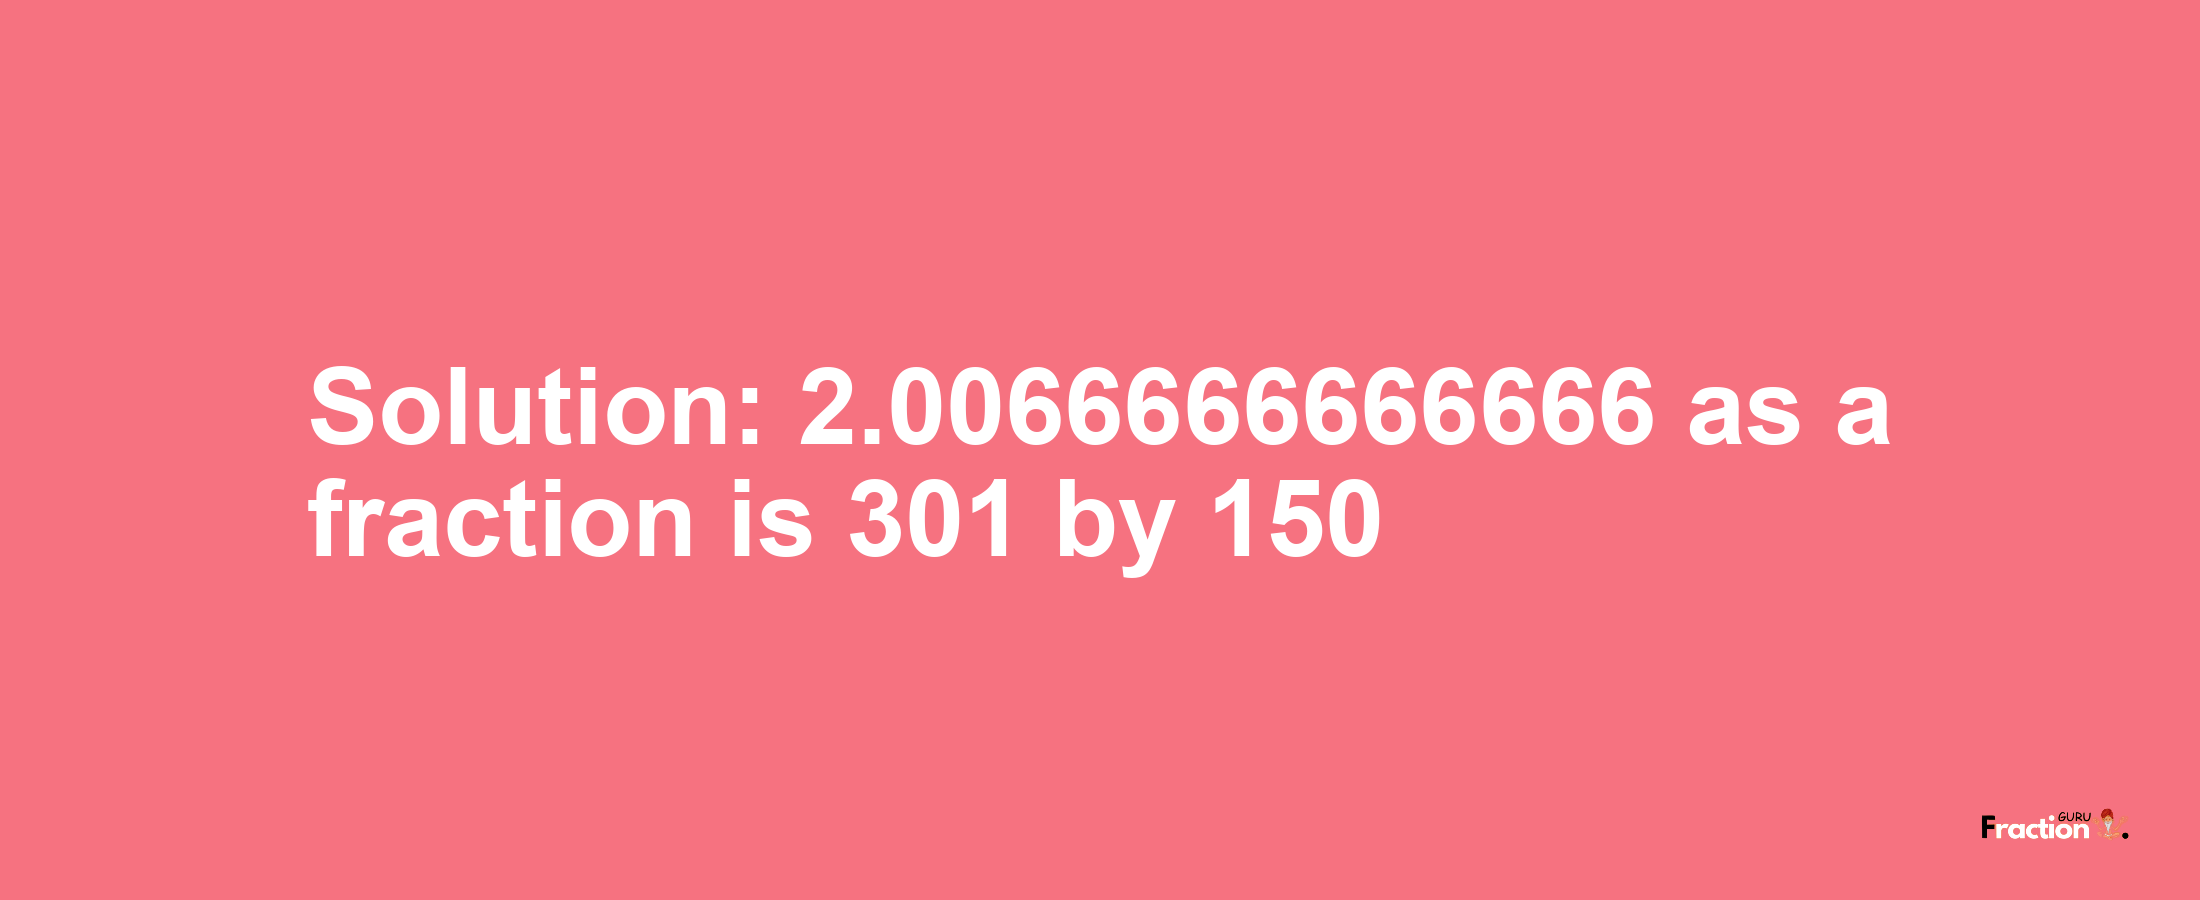 Solution:2.0066666666666 as a fraction is 301/150